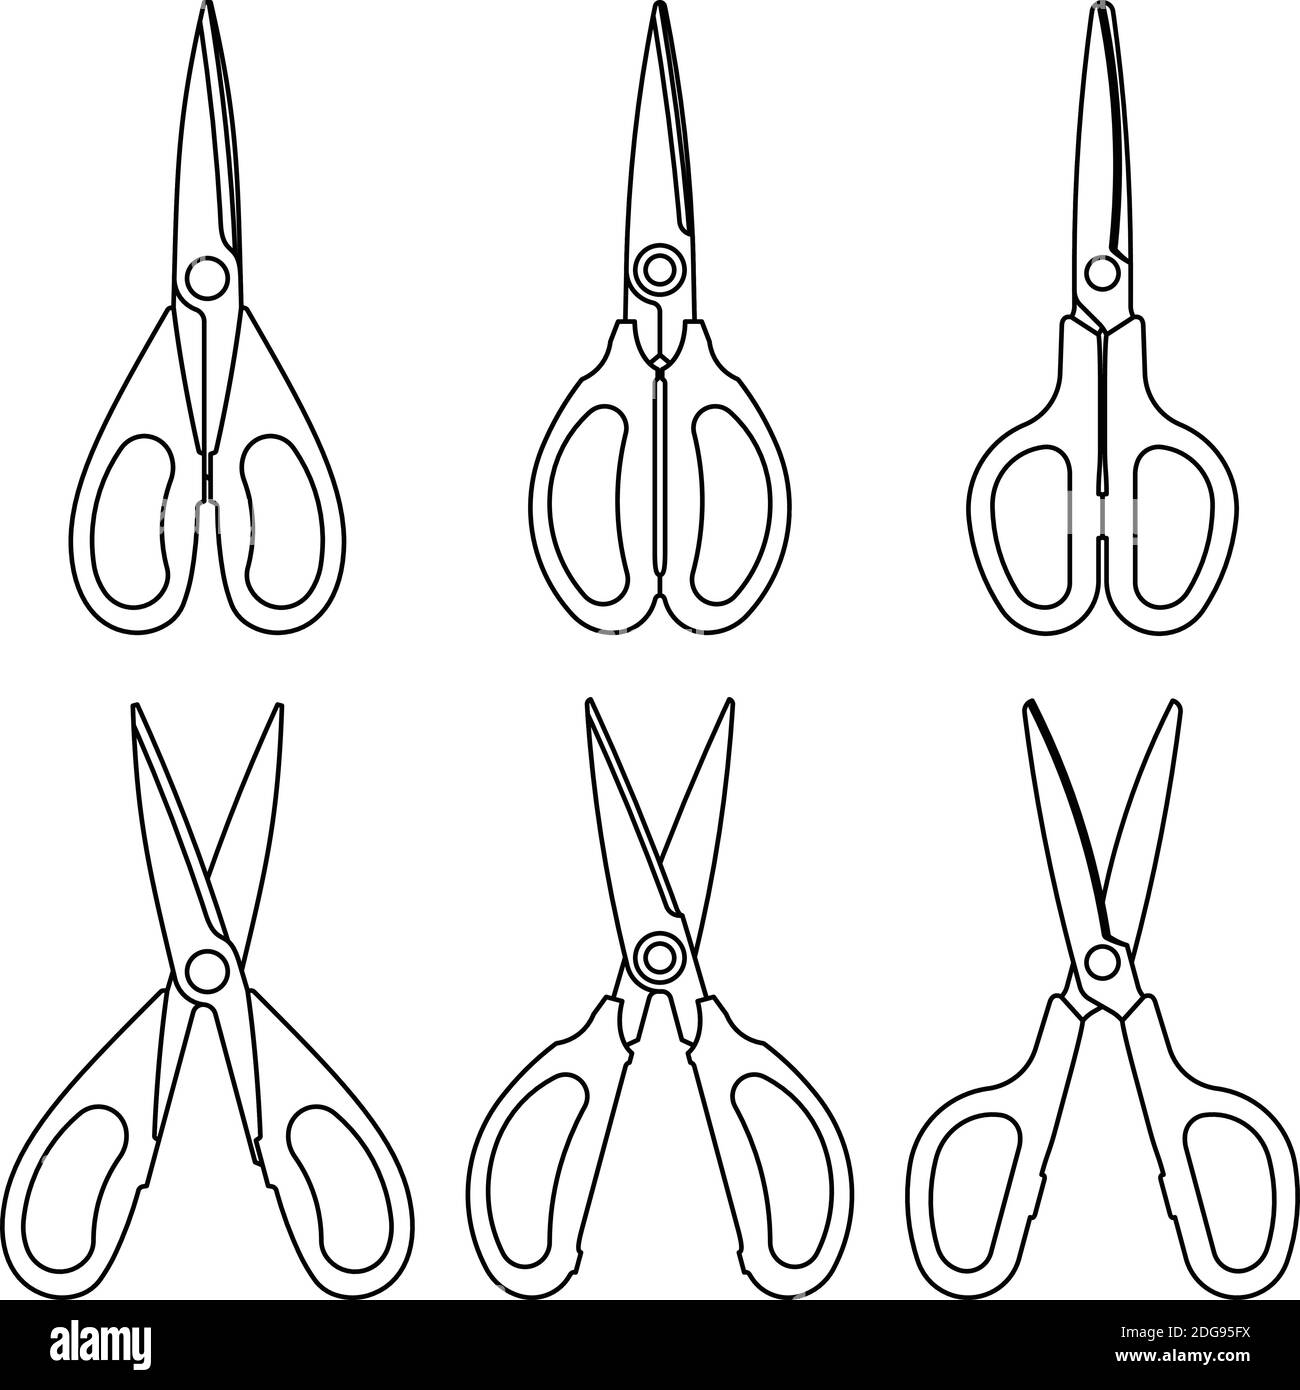 Cutting tool. Scissors. Shears. Thin line icons Stock Vector